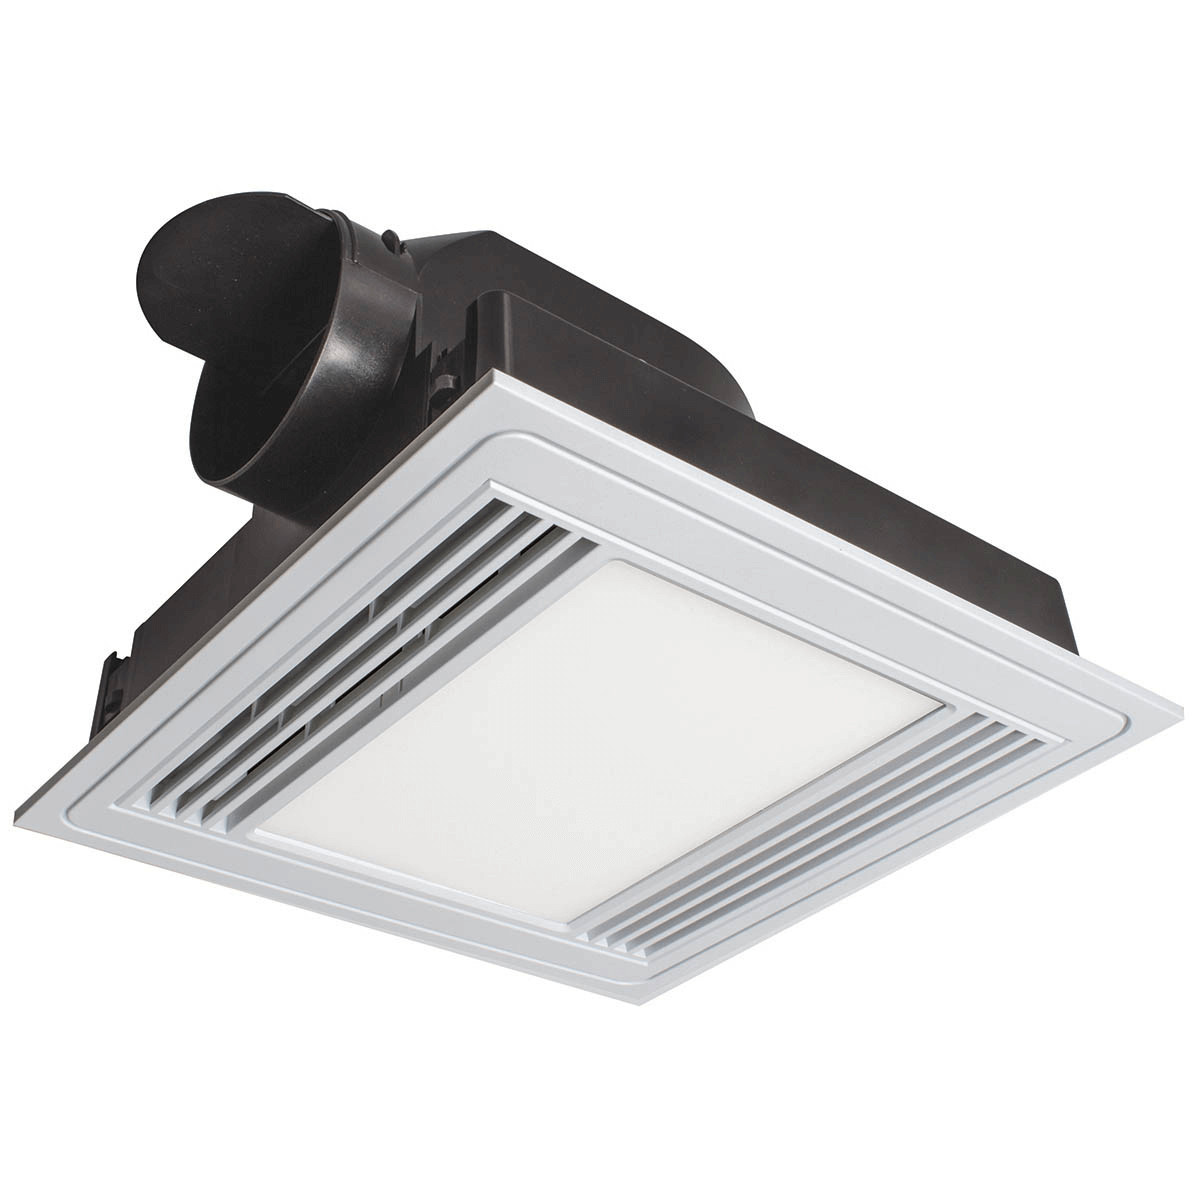 Bathroom Fan With Led Light
 Amazing Tips on How to Clean a Bathroom Exhaust Fan in 10